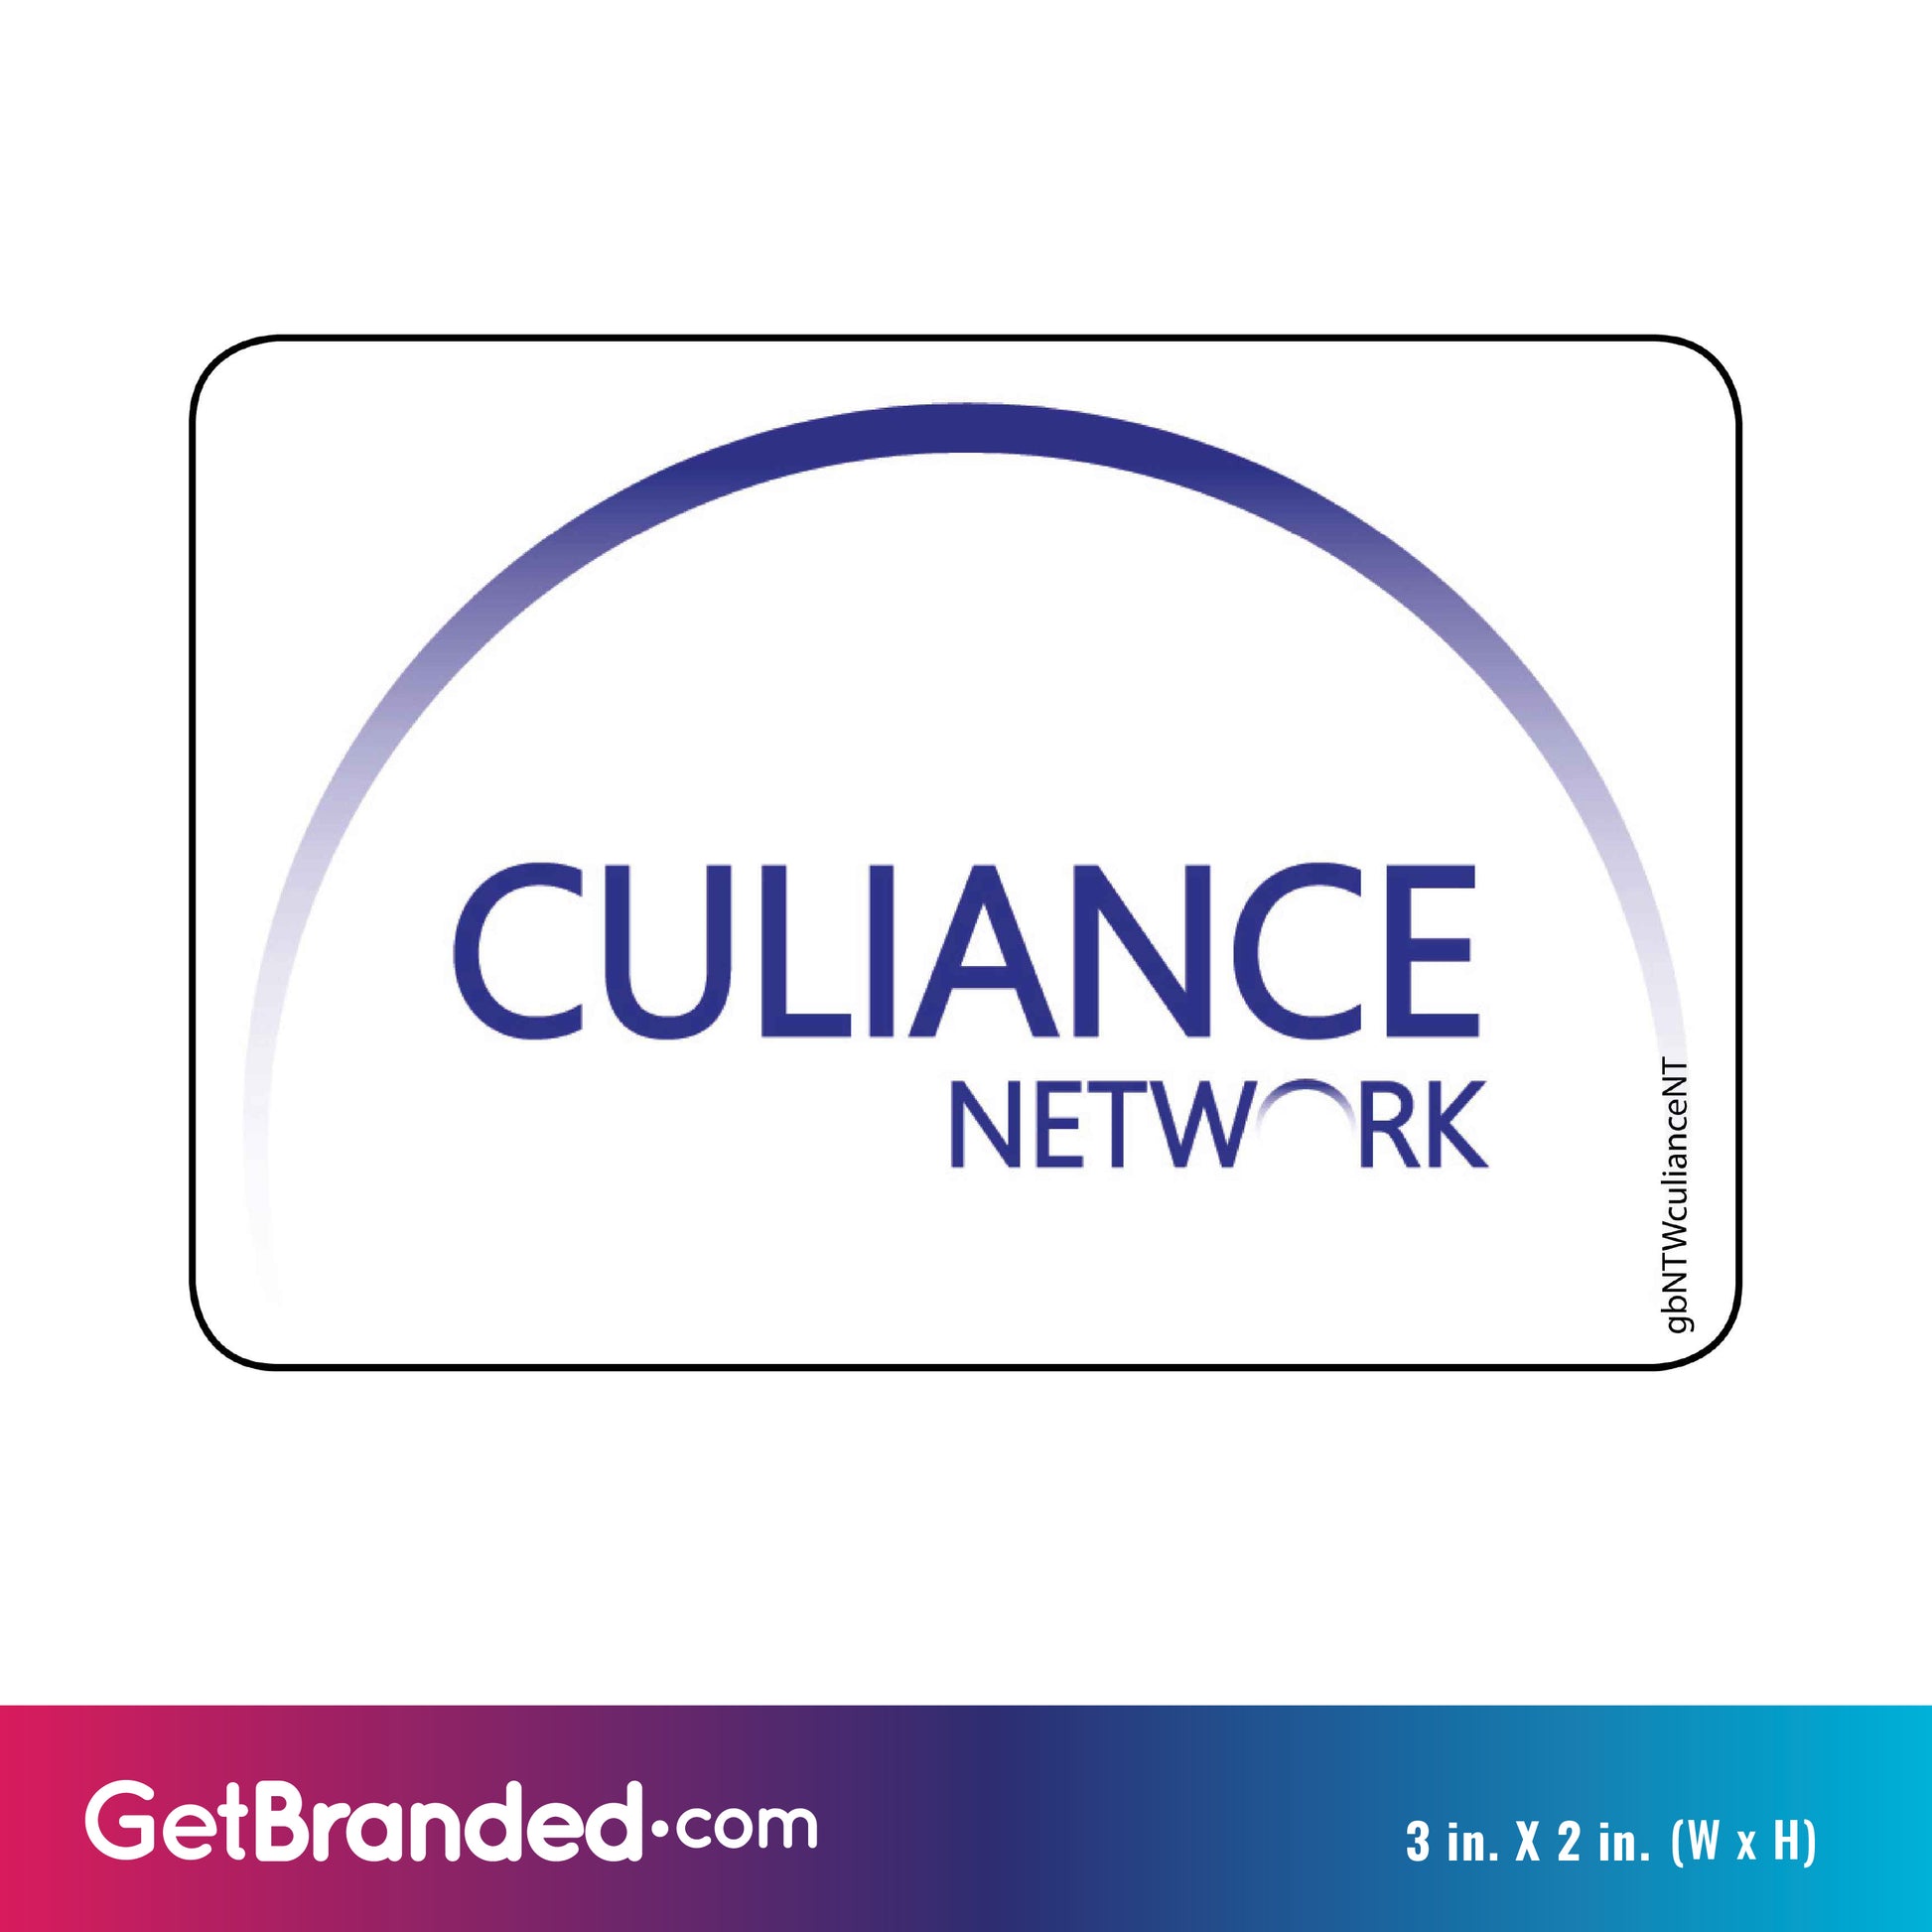 Single Network Decal, CUliance Network